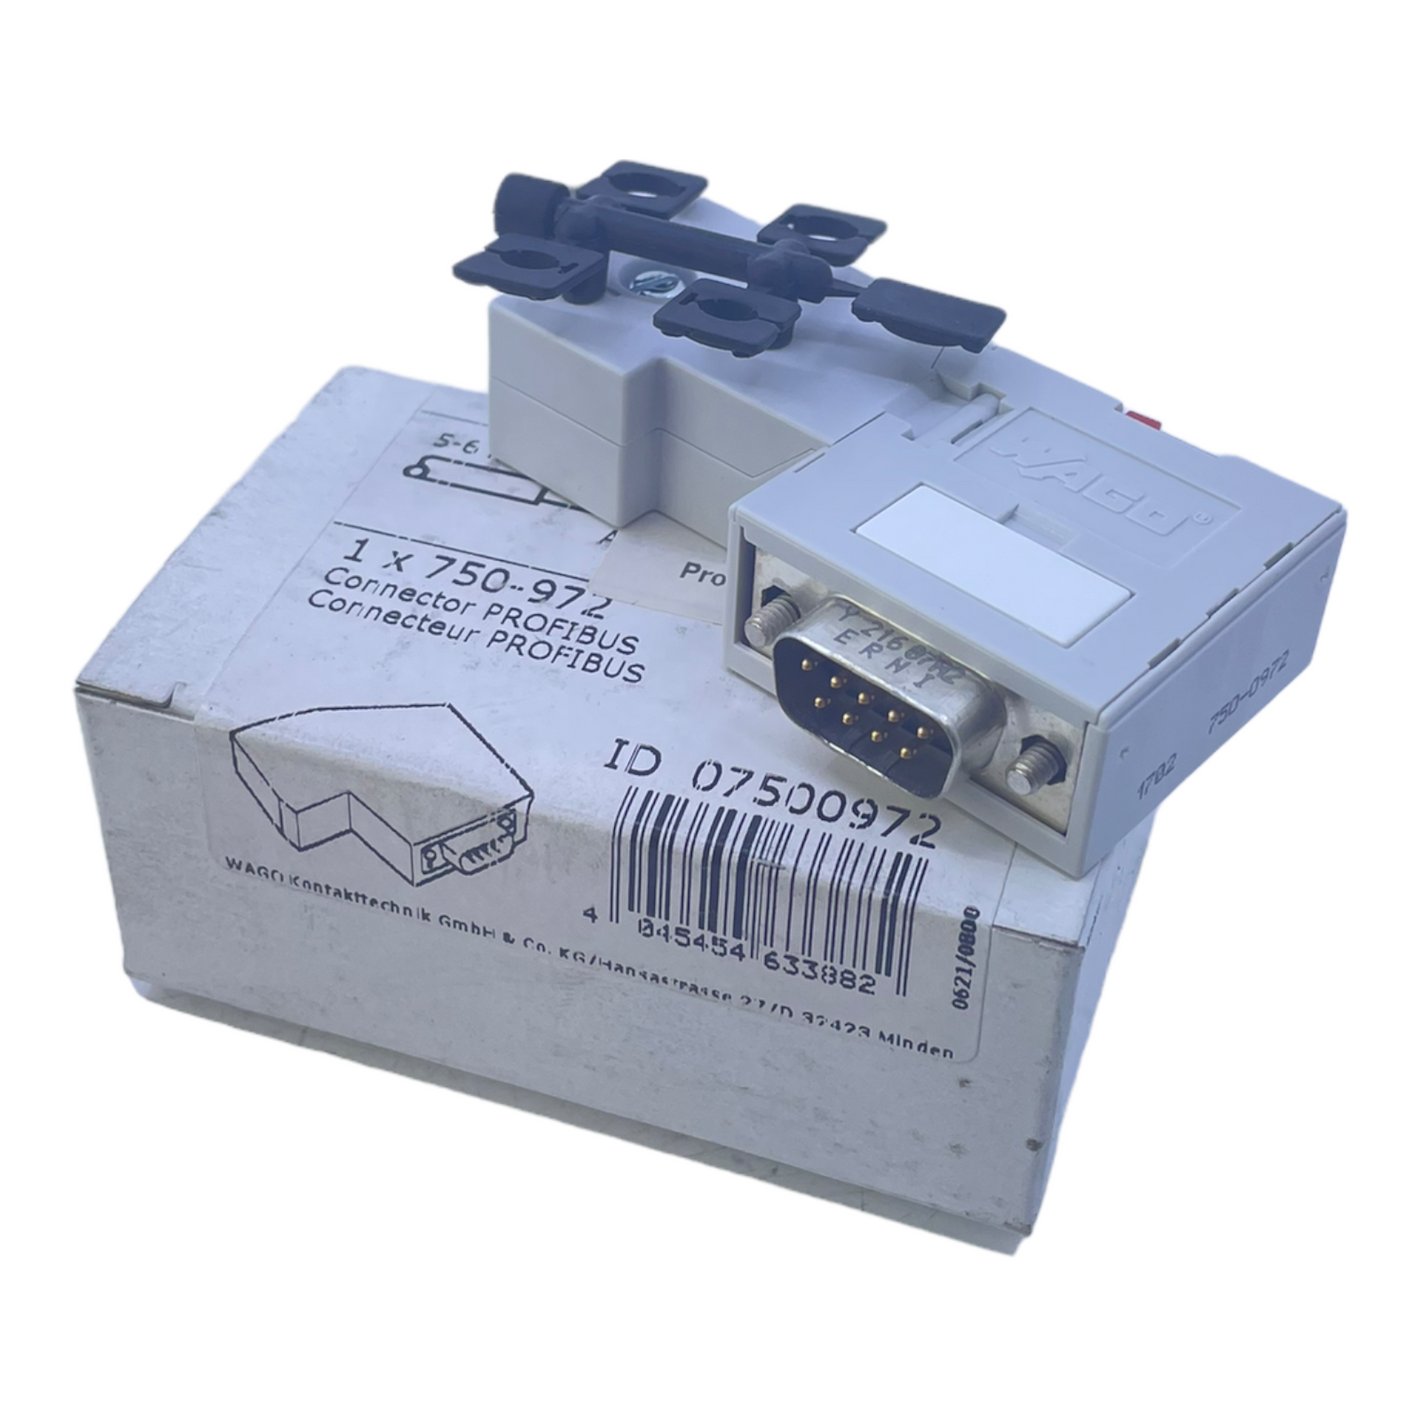 Wago 750-972 PROFIBUS data connector for industrial use 750-972 Wago 